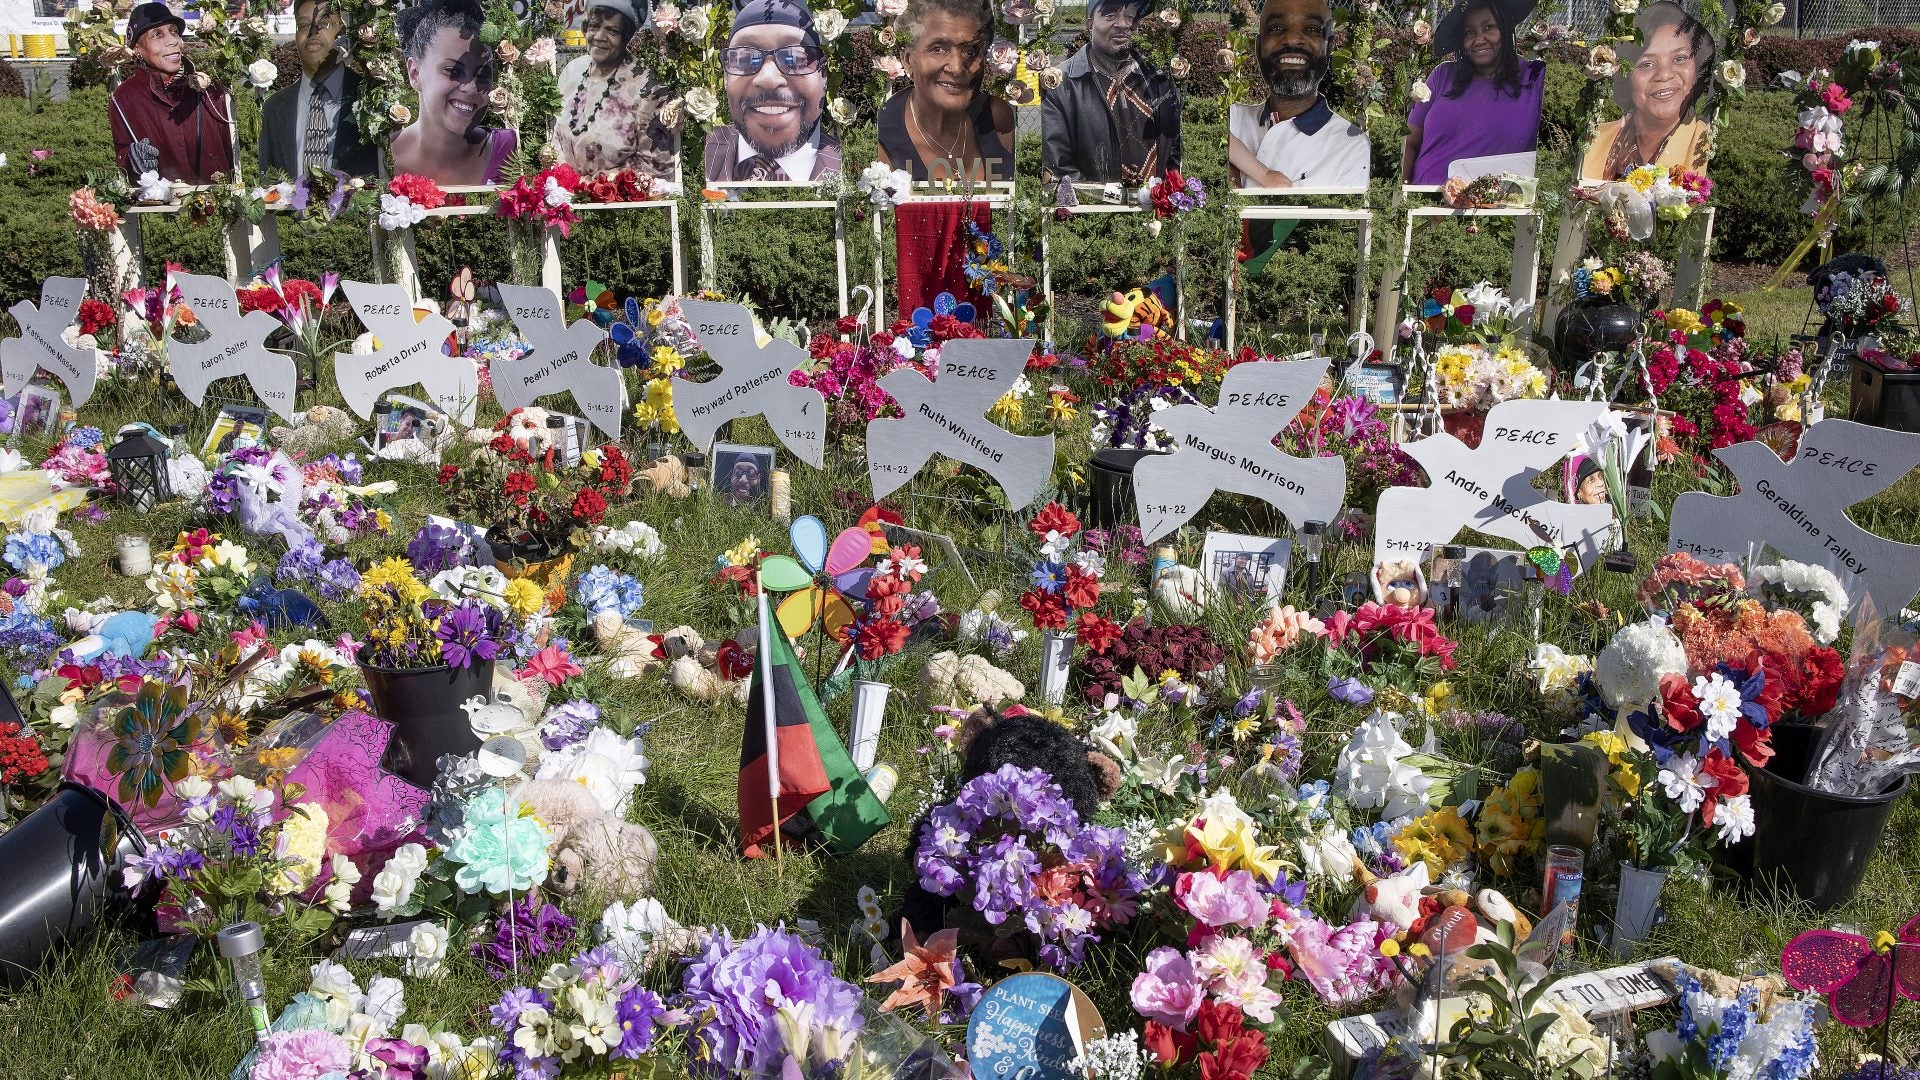 Two Years After A Racist Mass Shooting In Buffalo, A Memorial Honoring The Victims Is In The Works